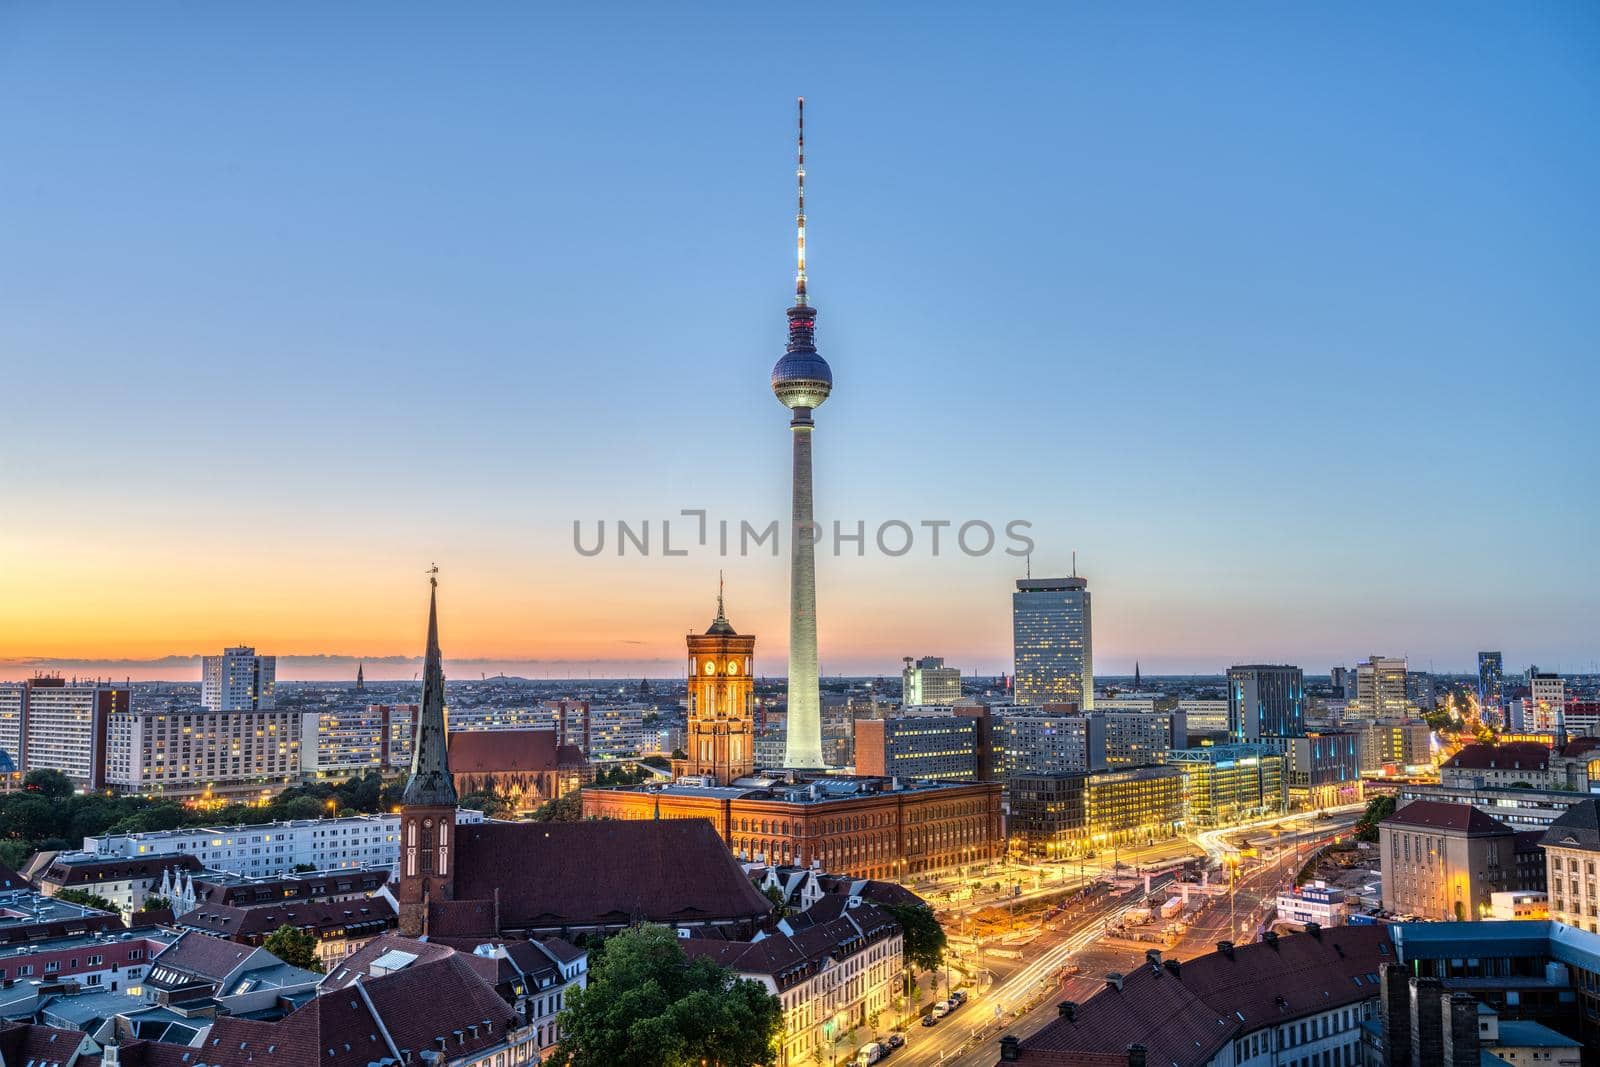 The iconic TV Tower and Berlin Mitte at twilight by elxeneize